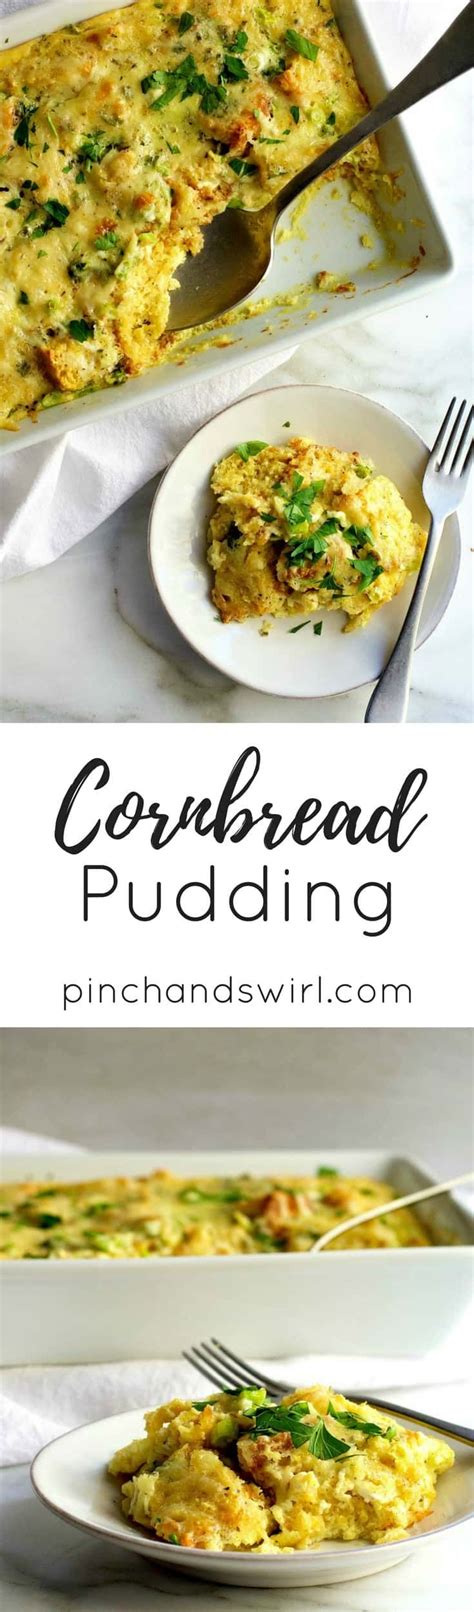 I've made this a time or two using variations of this recipe and have gotten rave reviews each time. Cornbread Pudding is a delicious way to use up leftover skillet cornbread! Made with cheese ...